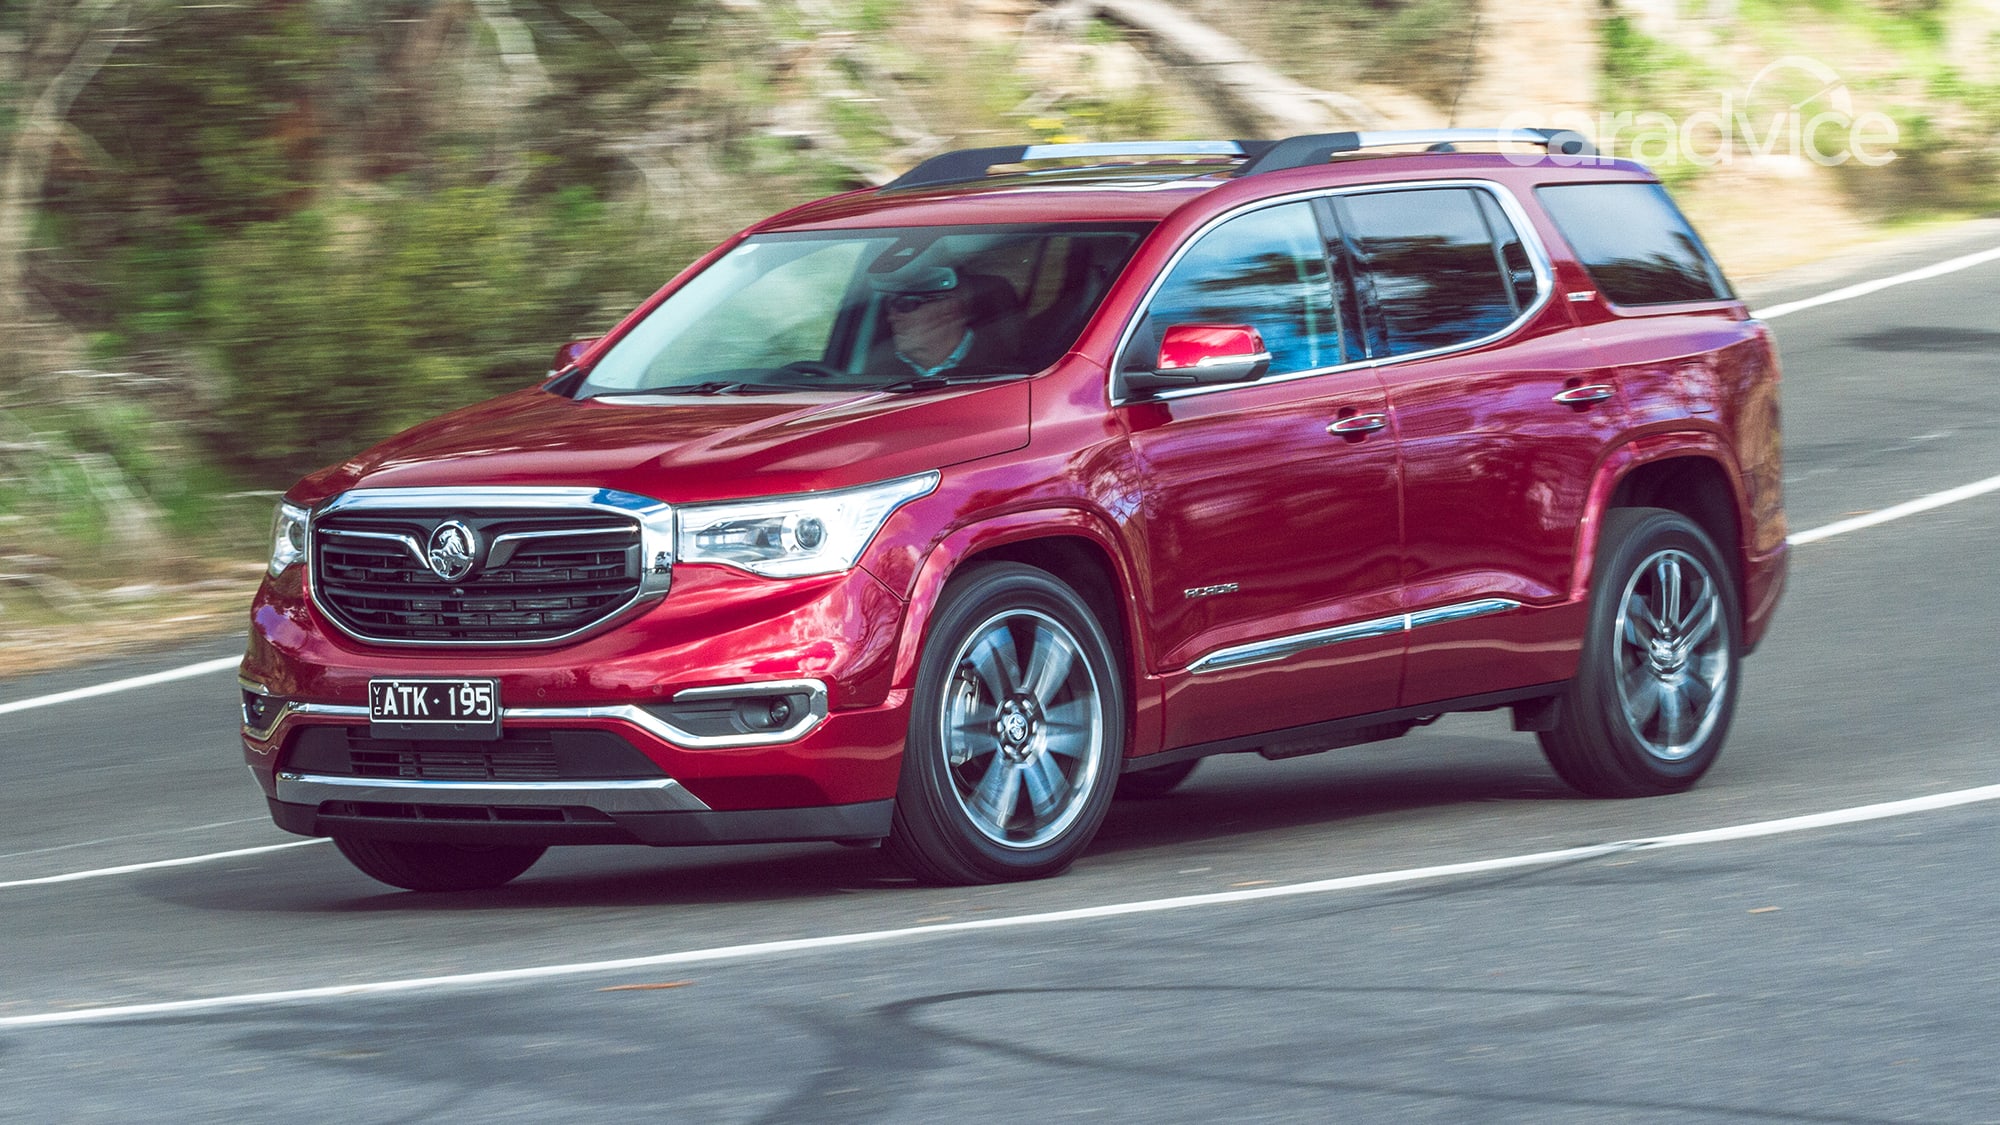 2019 Holden Acadia Review Caradvice